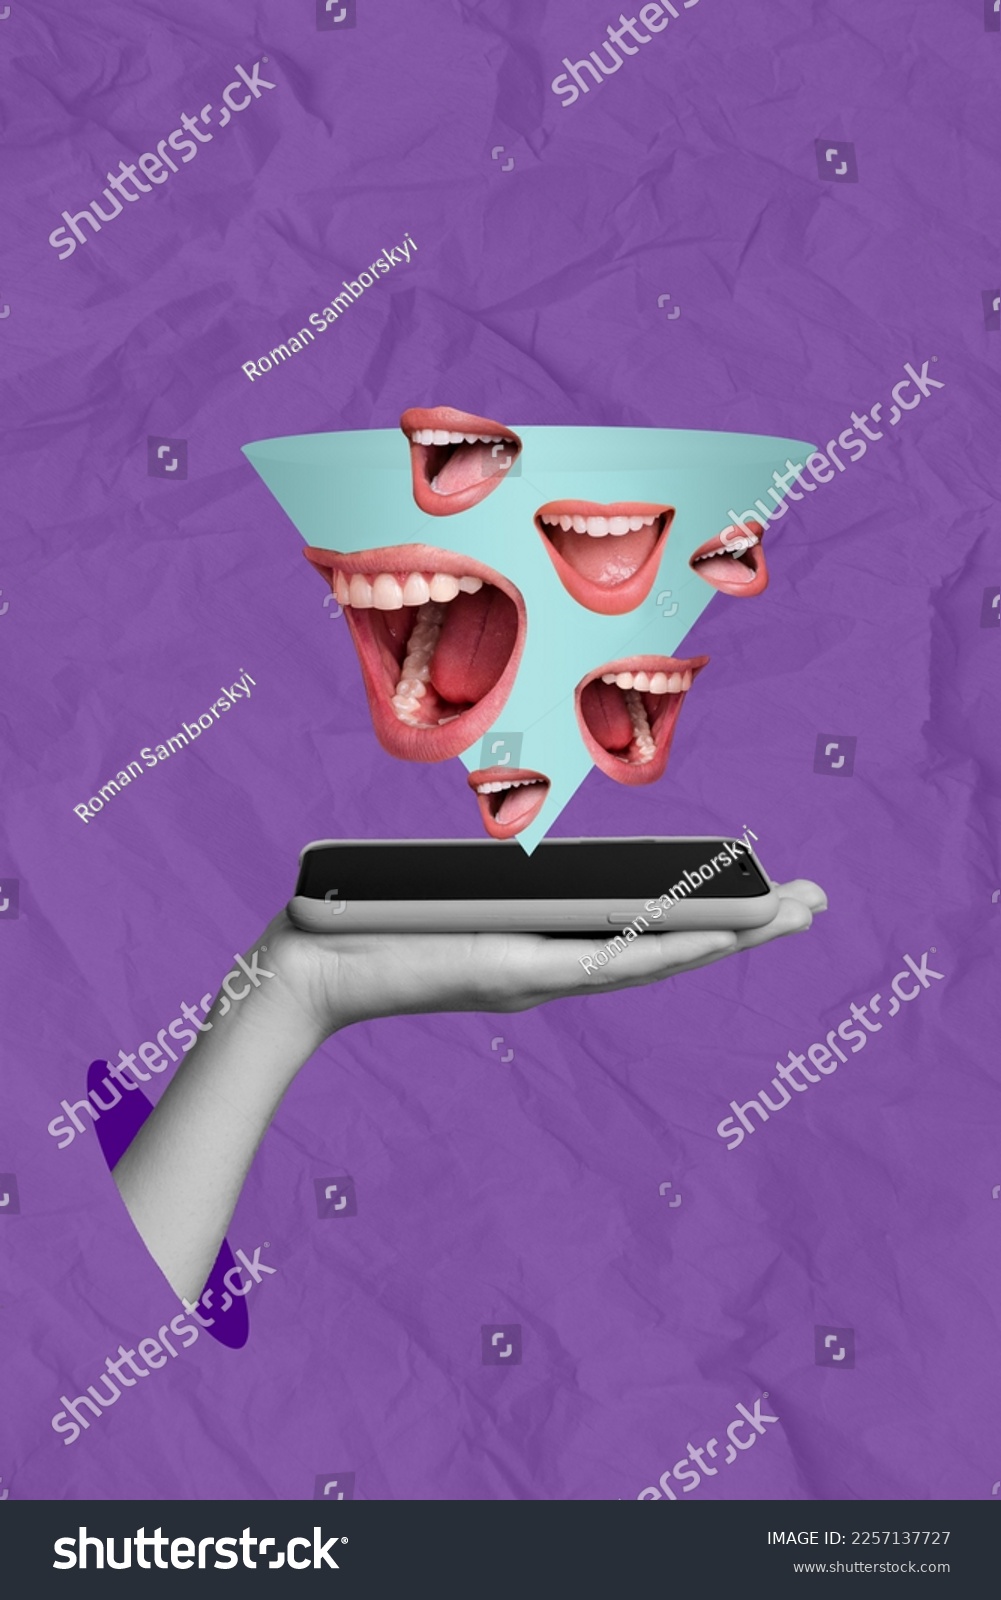 Creative photo 3d collage artwork postcard poster picture of arm hold telephone receive sms from followers isolated on painting background #2257137727